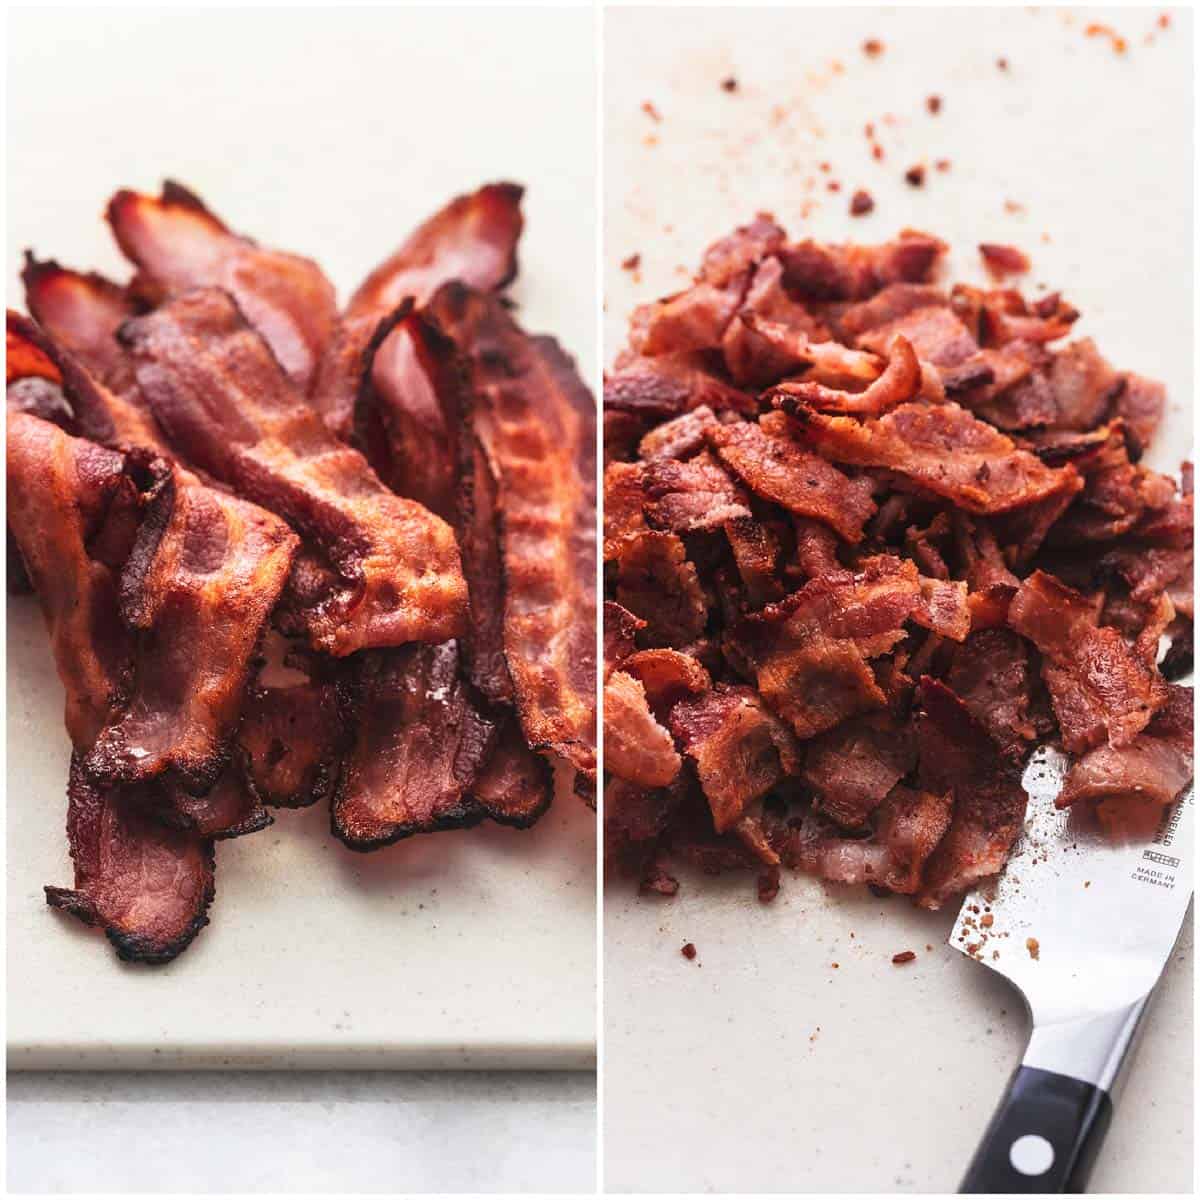 side by side images of cooked bacon strips and chopped bacon.